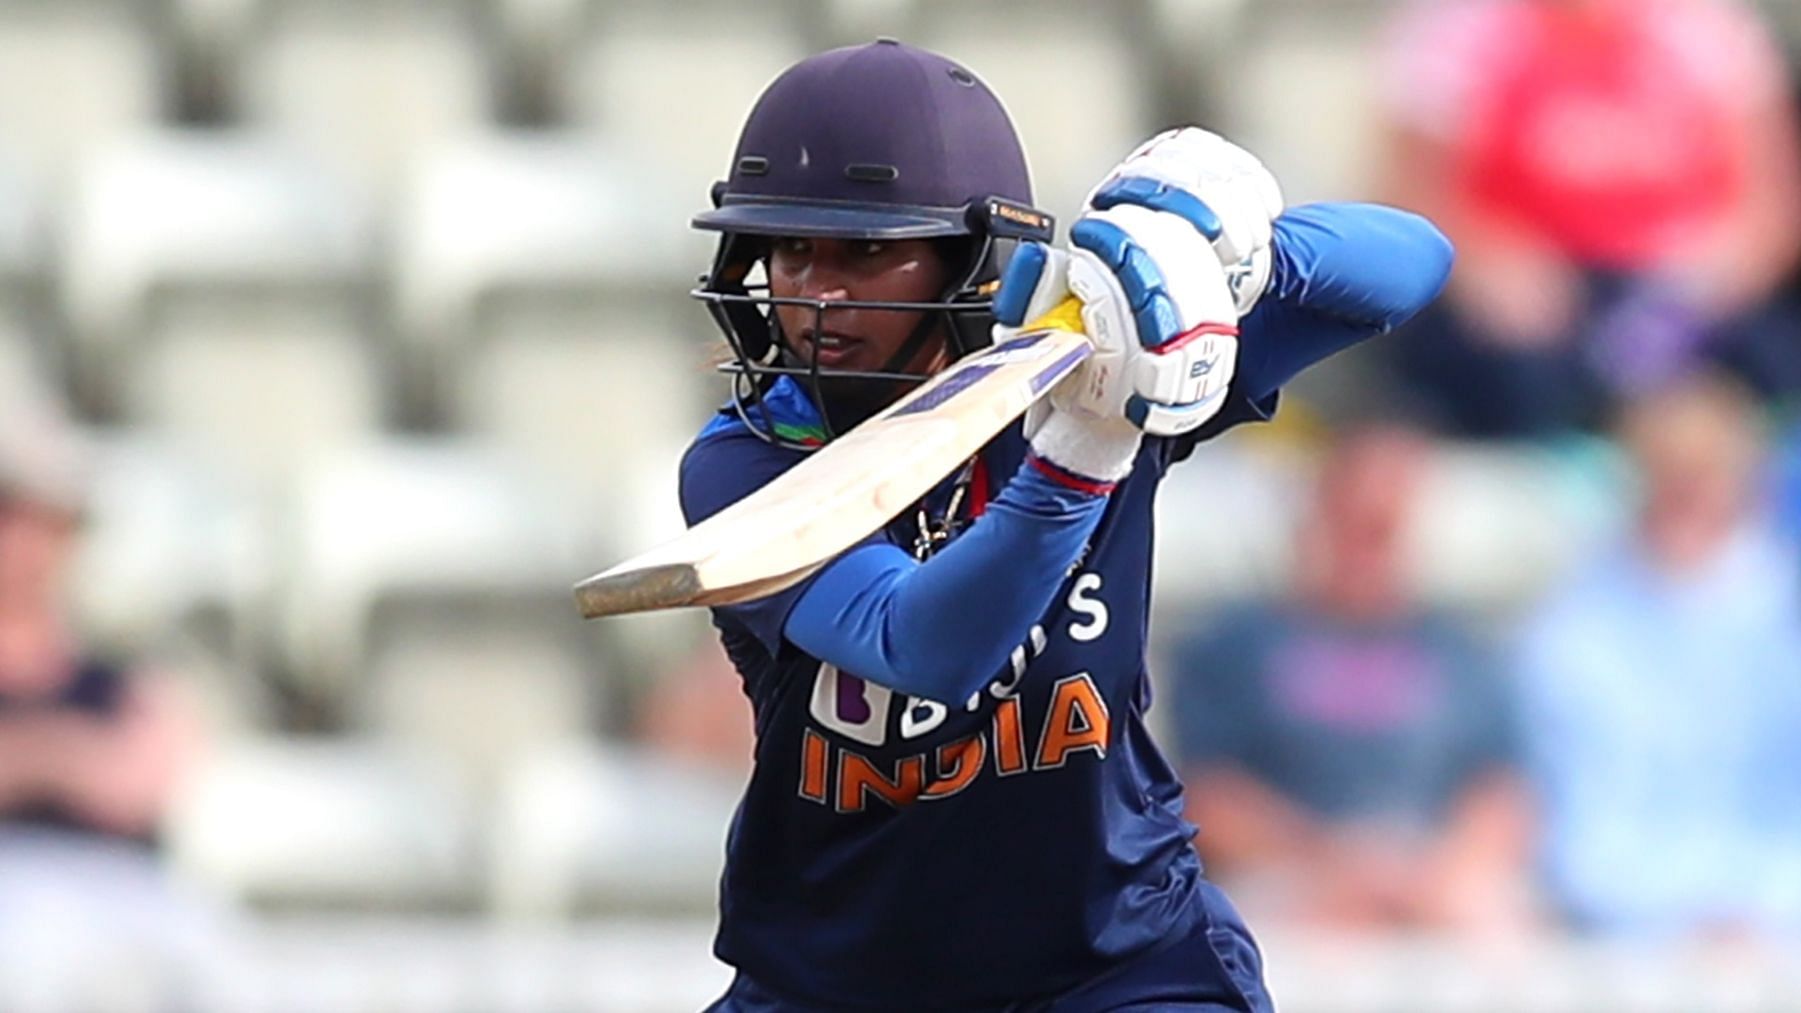 <div class="paragraphs"><p>Mithali Raj scored an unbeaten 75 off 86 balls to help India beat England by 4 wickets in the third ODI on Saturday.</p></div>